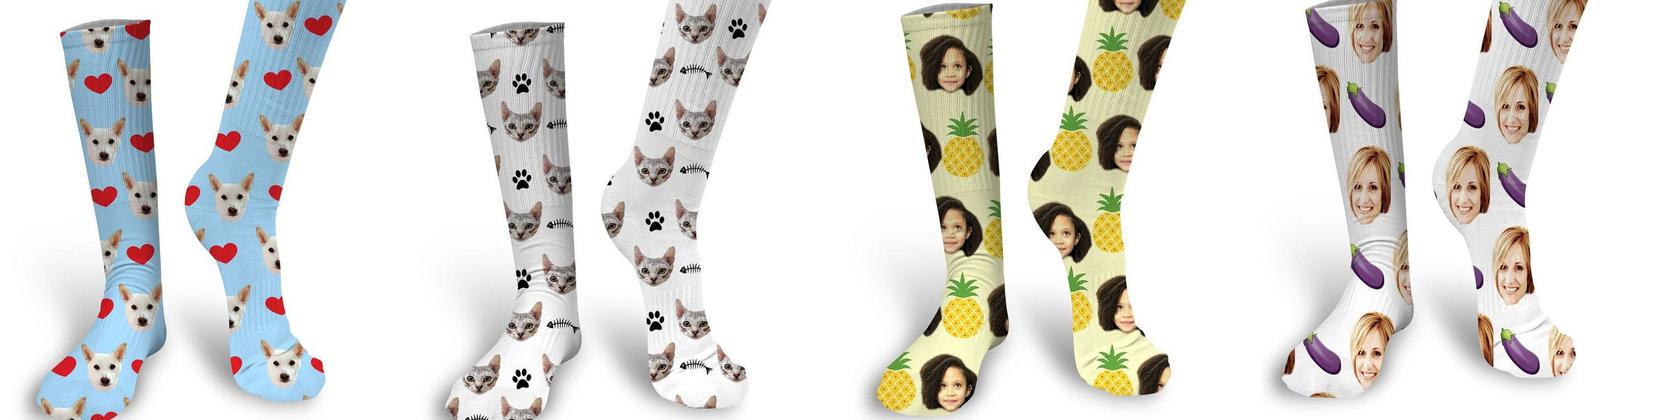 funny face, pineapple, and cat socks